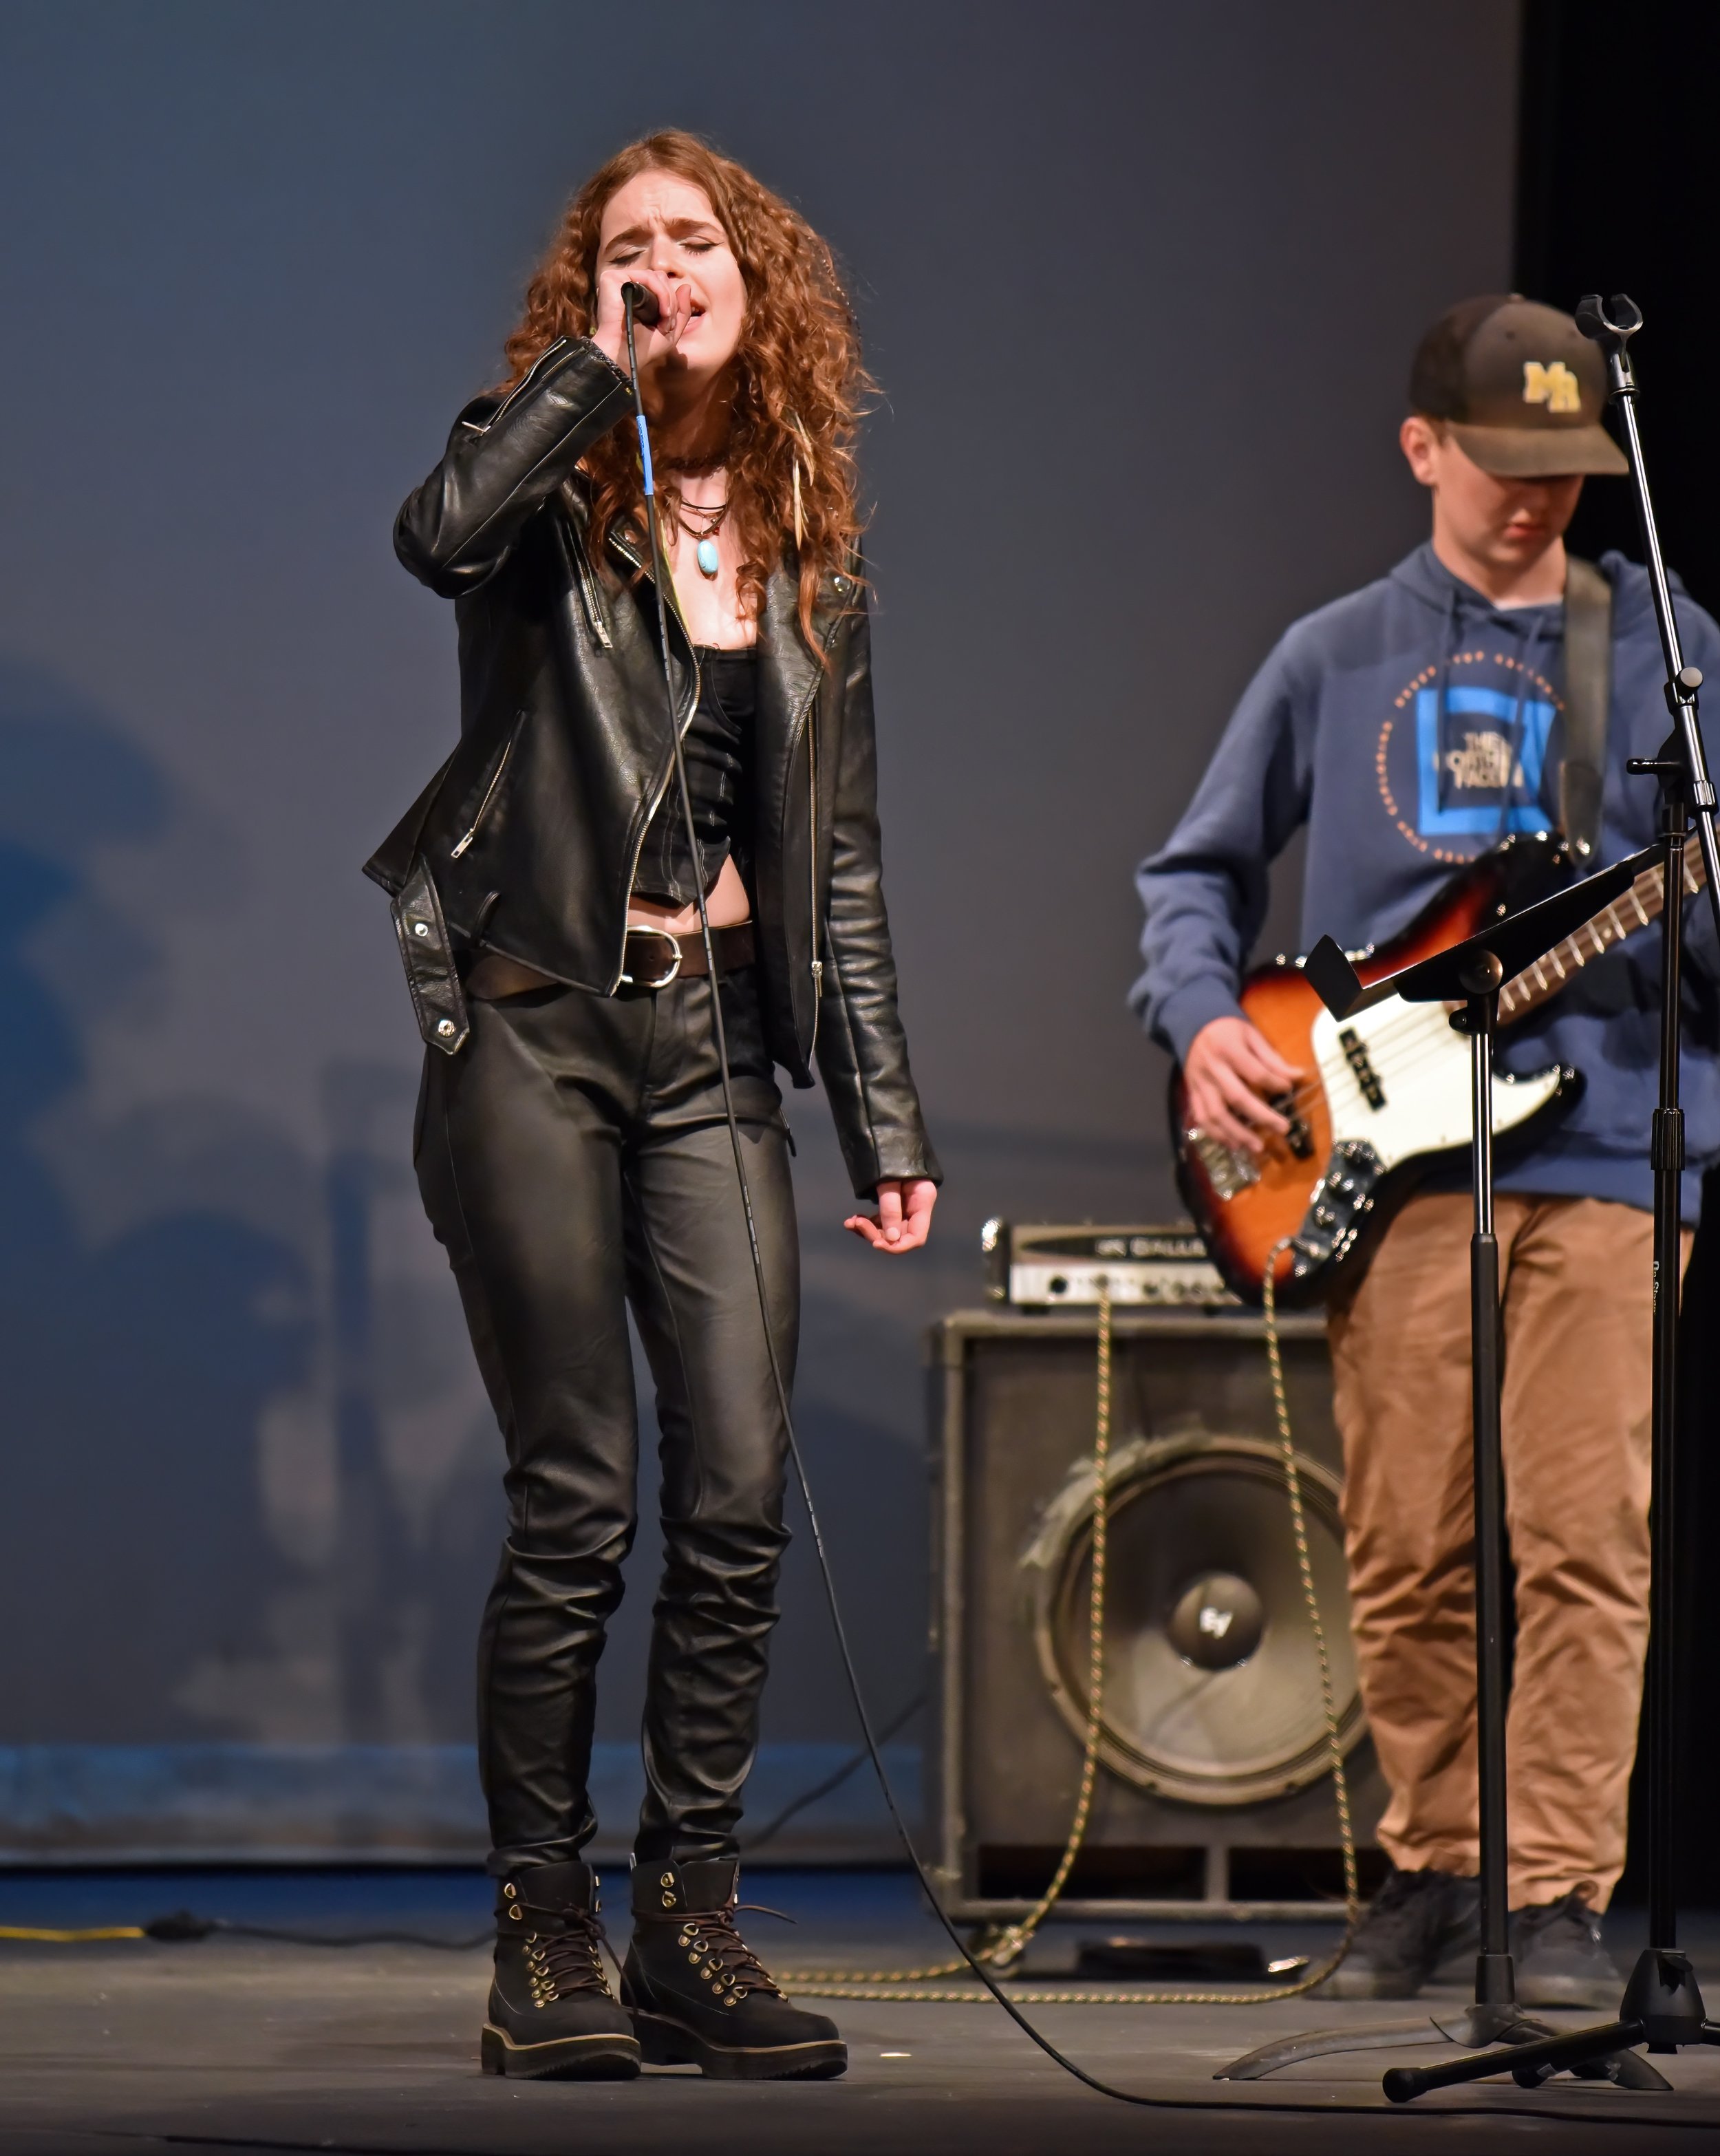   Zoe Blackman sings with HU Assembly Band. Photo by Gordon Miller  